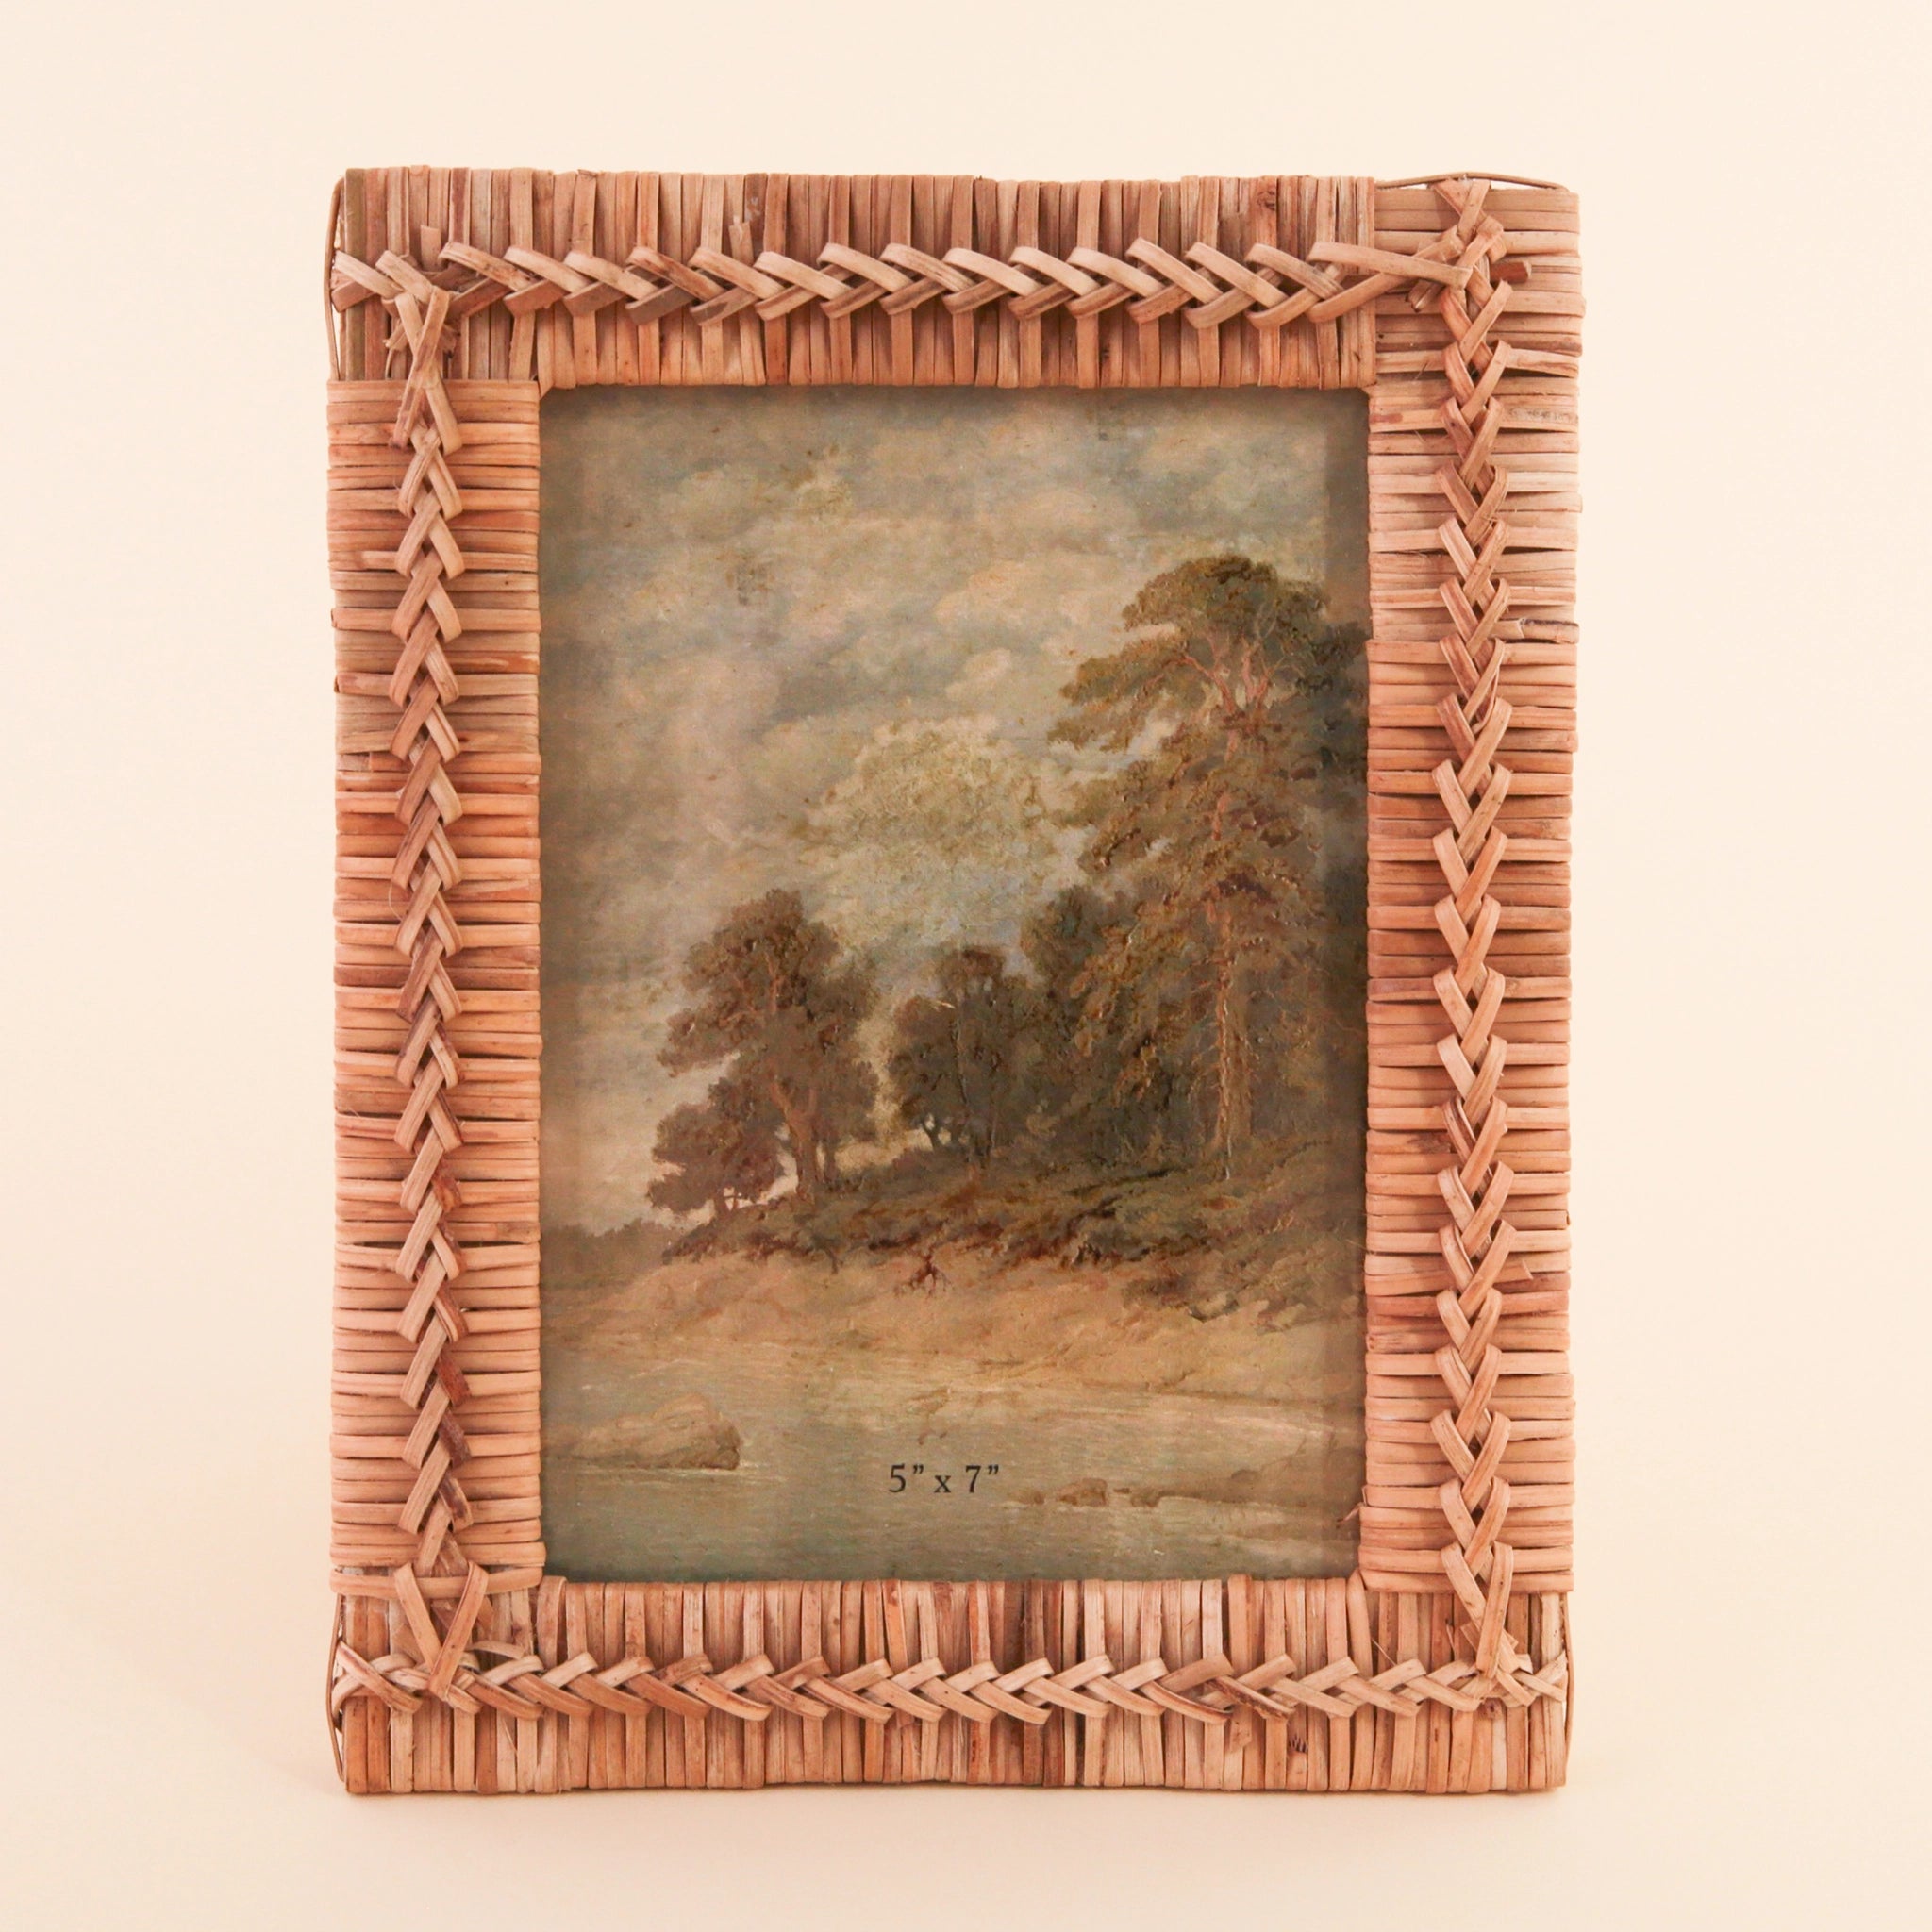 Photographed on a cream background is a 5" x 7" hand woven rattan frame a natural brown shade detailed with intricate stitching int he center.